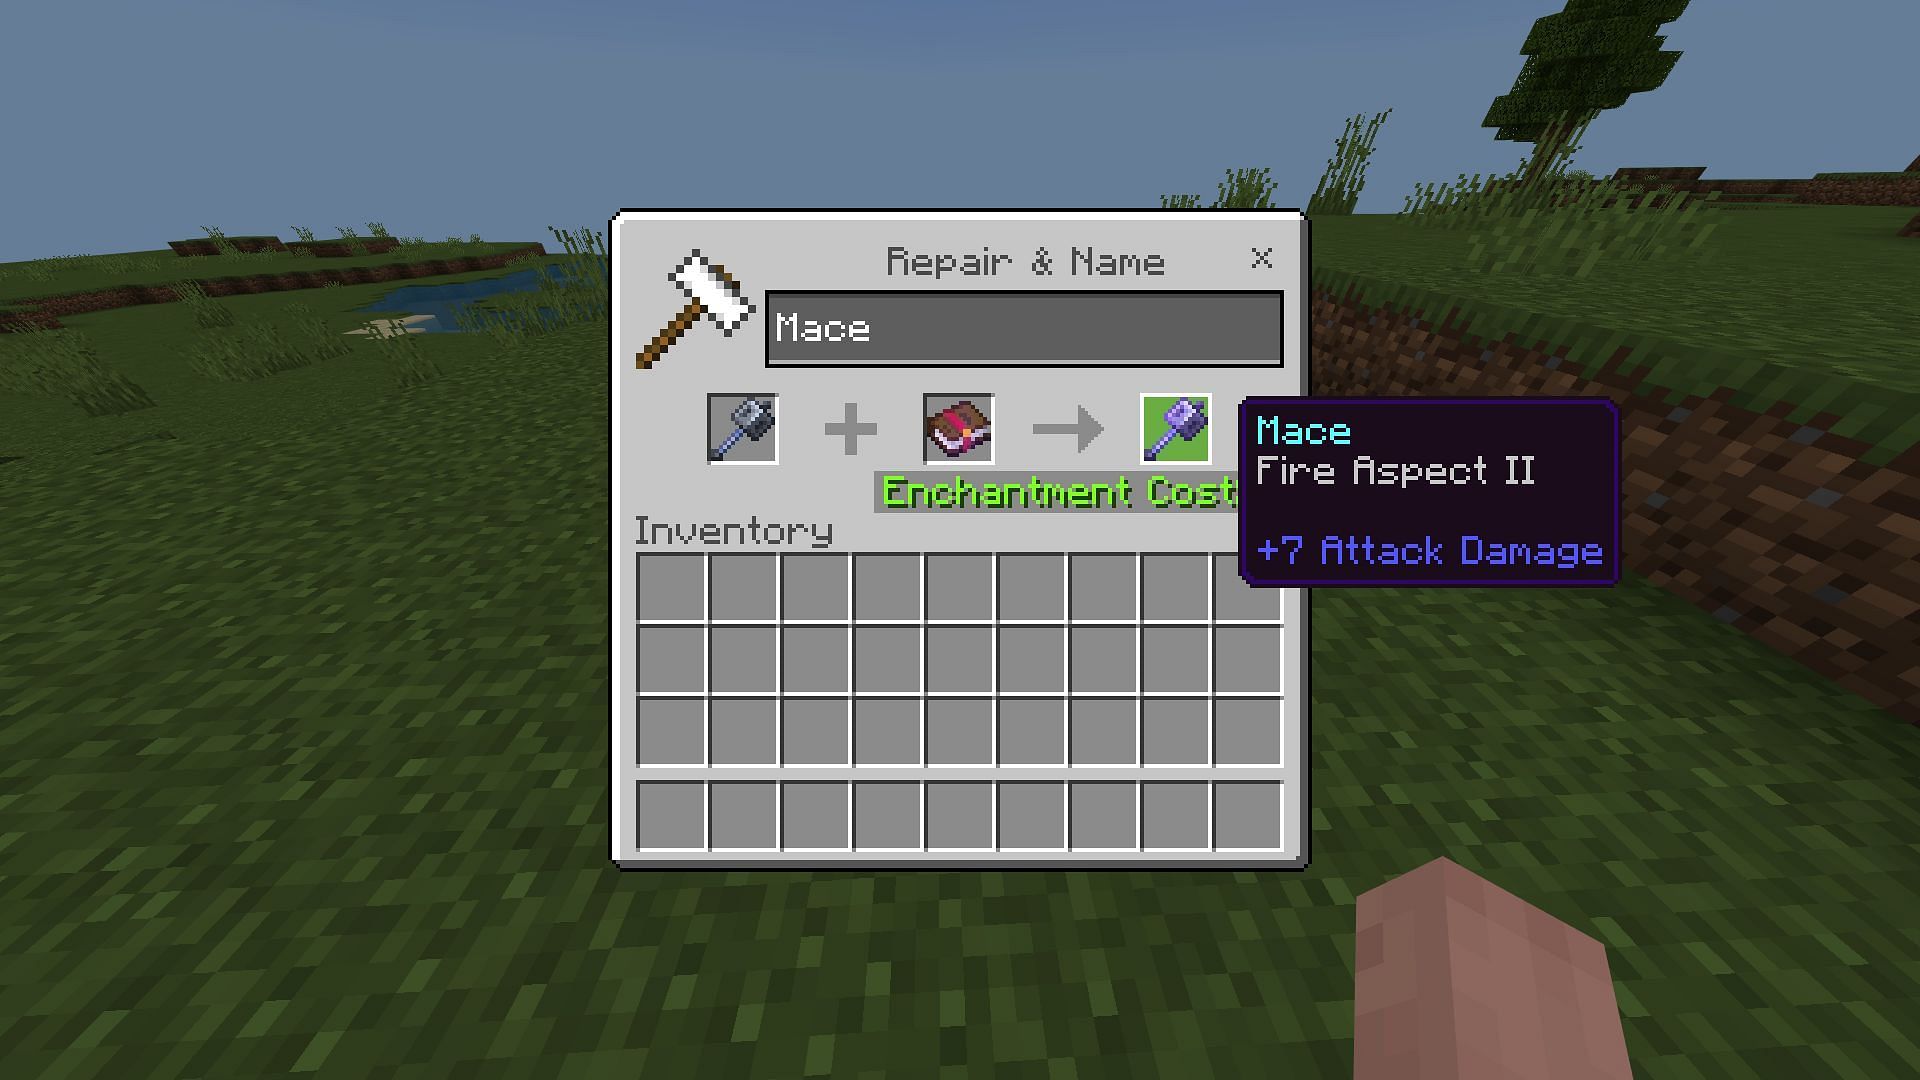 All compatible mace enchantments should now apply as expected in Minecraft Preview 1.21.0.23 (Image via Mojang)